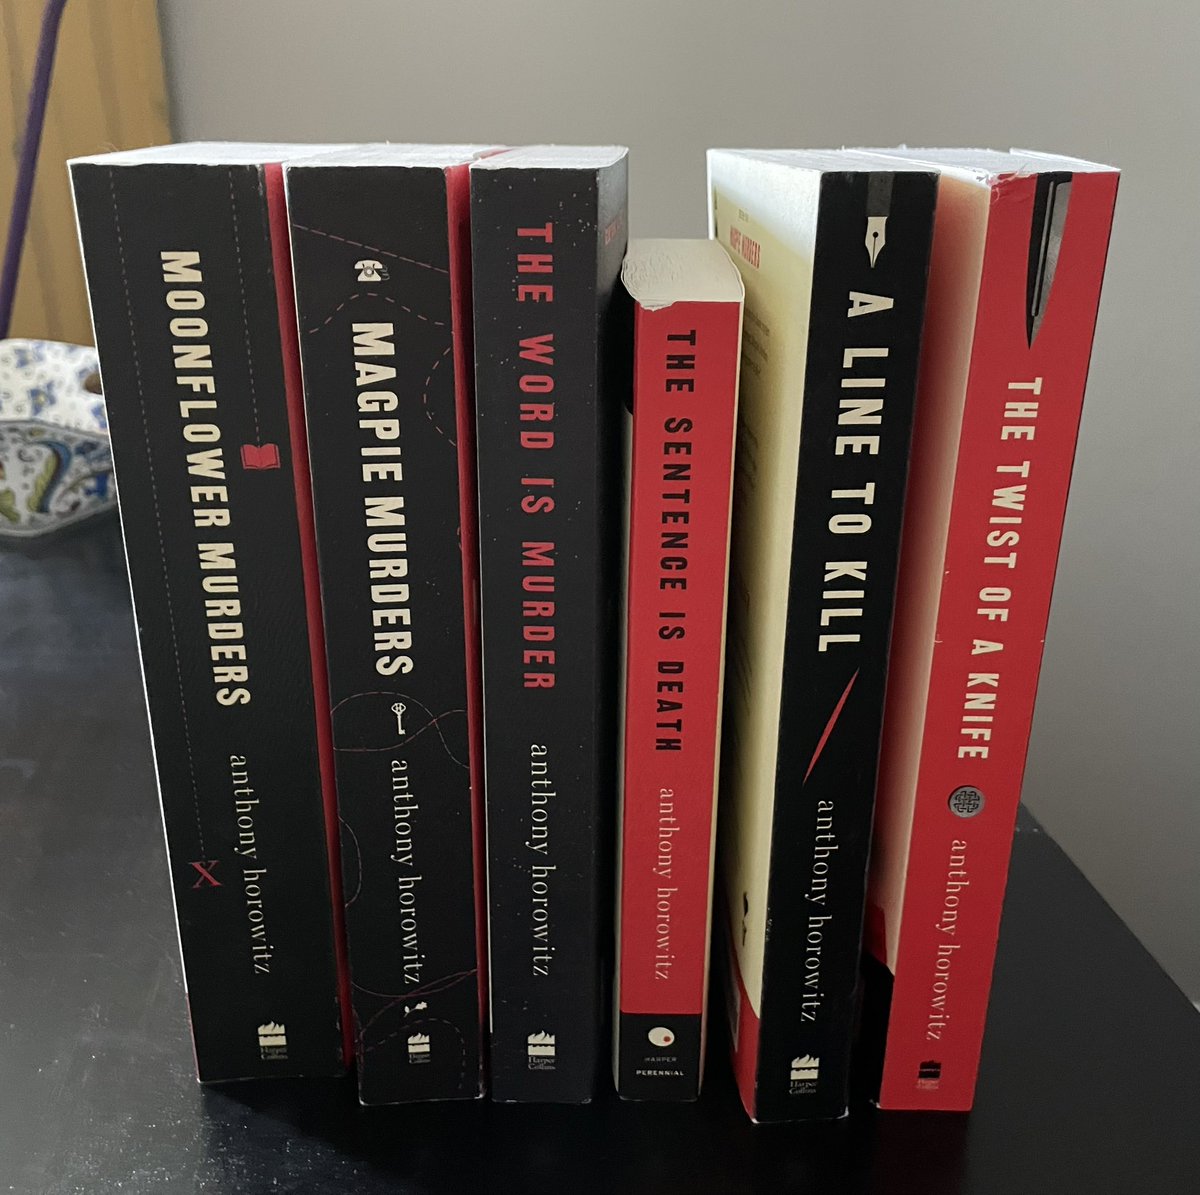 Having now met @AnthonyHorowitz  at #MotiveTo I’m renewed in my quest…. Where can I get the larger sized paperback  of The Sentence is Death - My bookshelf is most displeased with this aesthetic. Must solve this mystery.